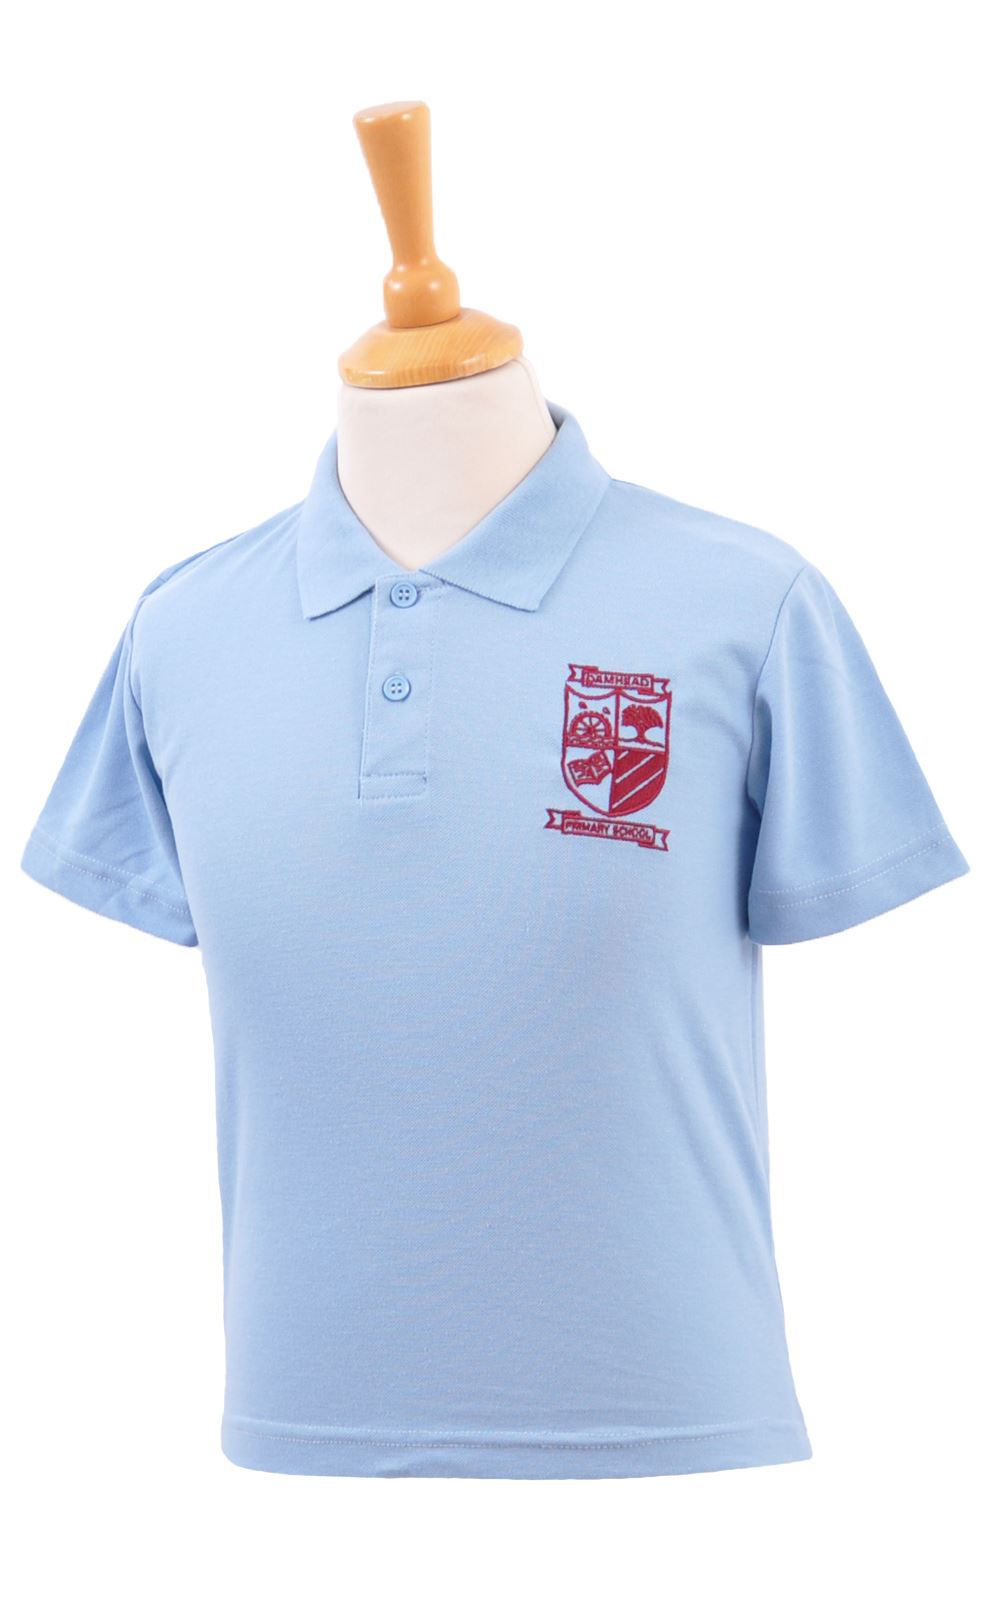 Picture of Damhead PS Polo Shirt - Woodbank